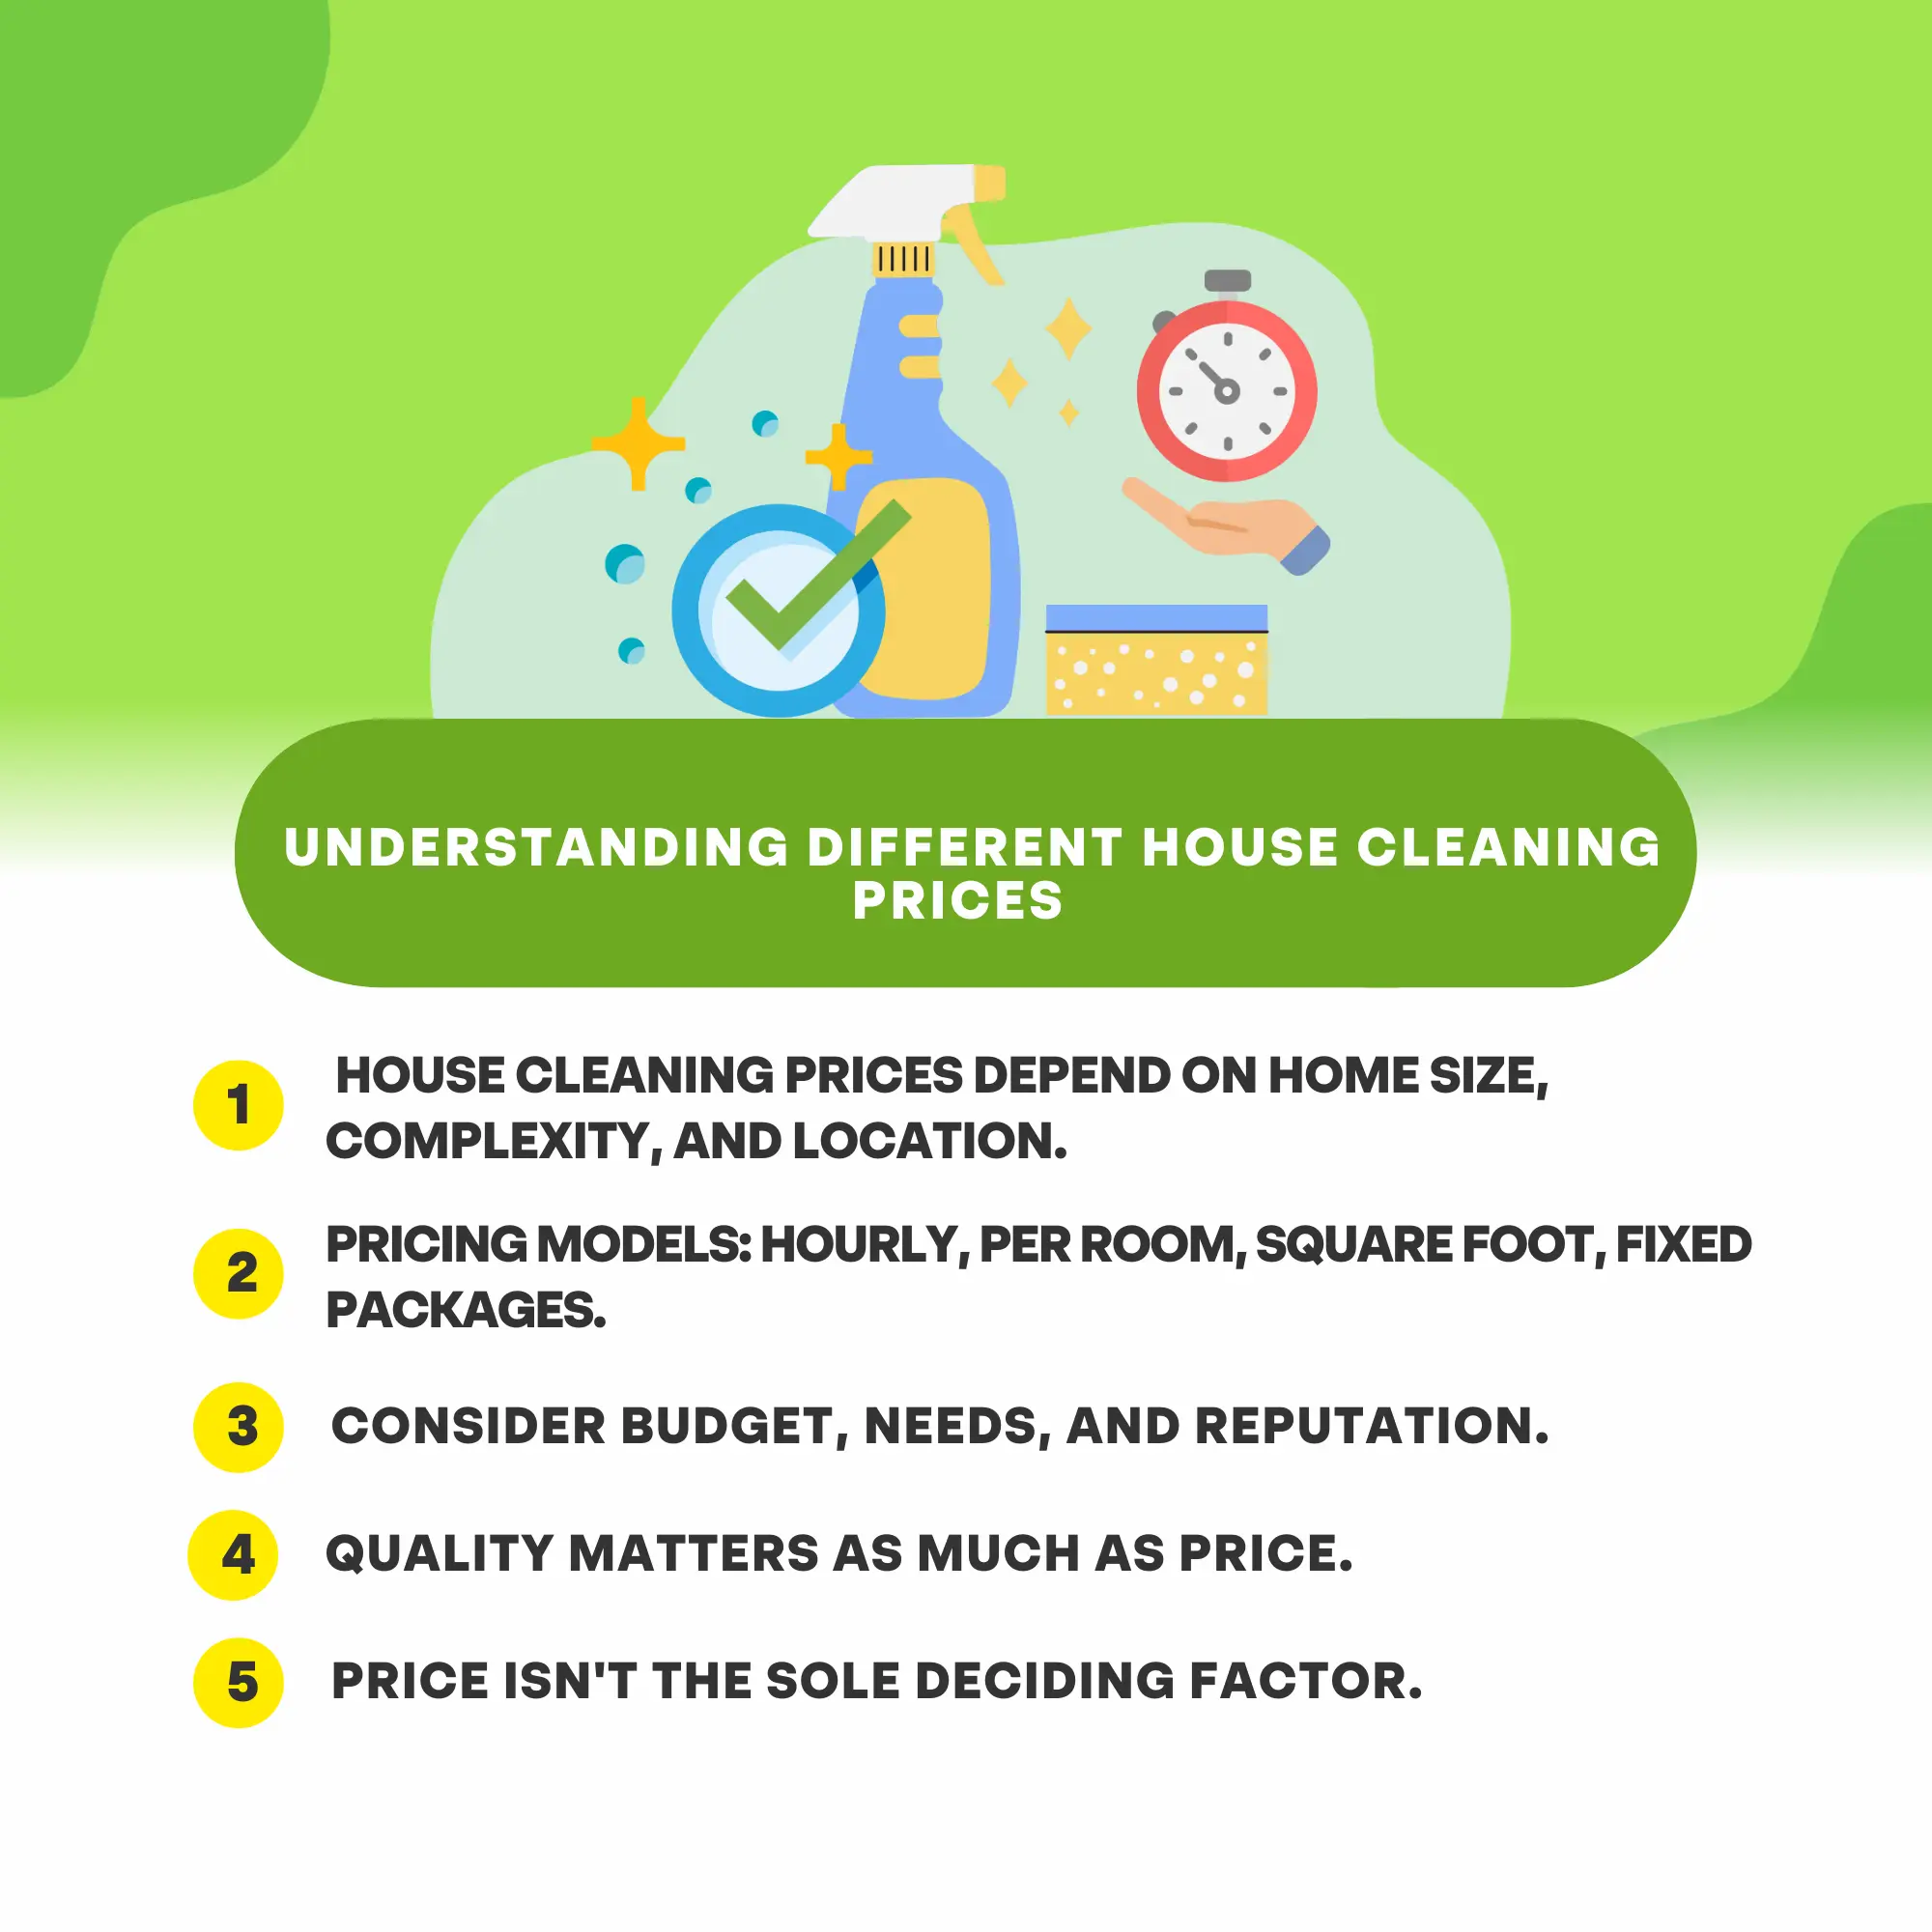 Understanding Different House Cleaning Prices